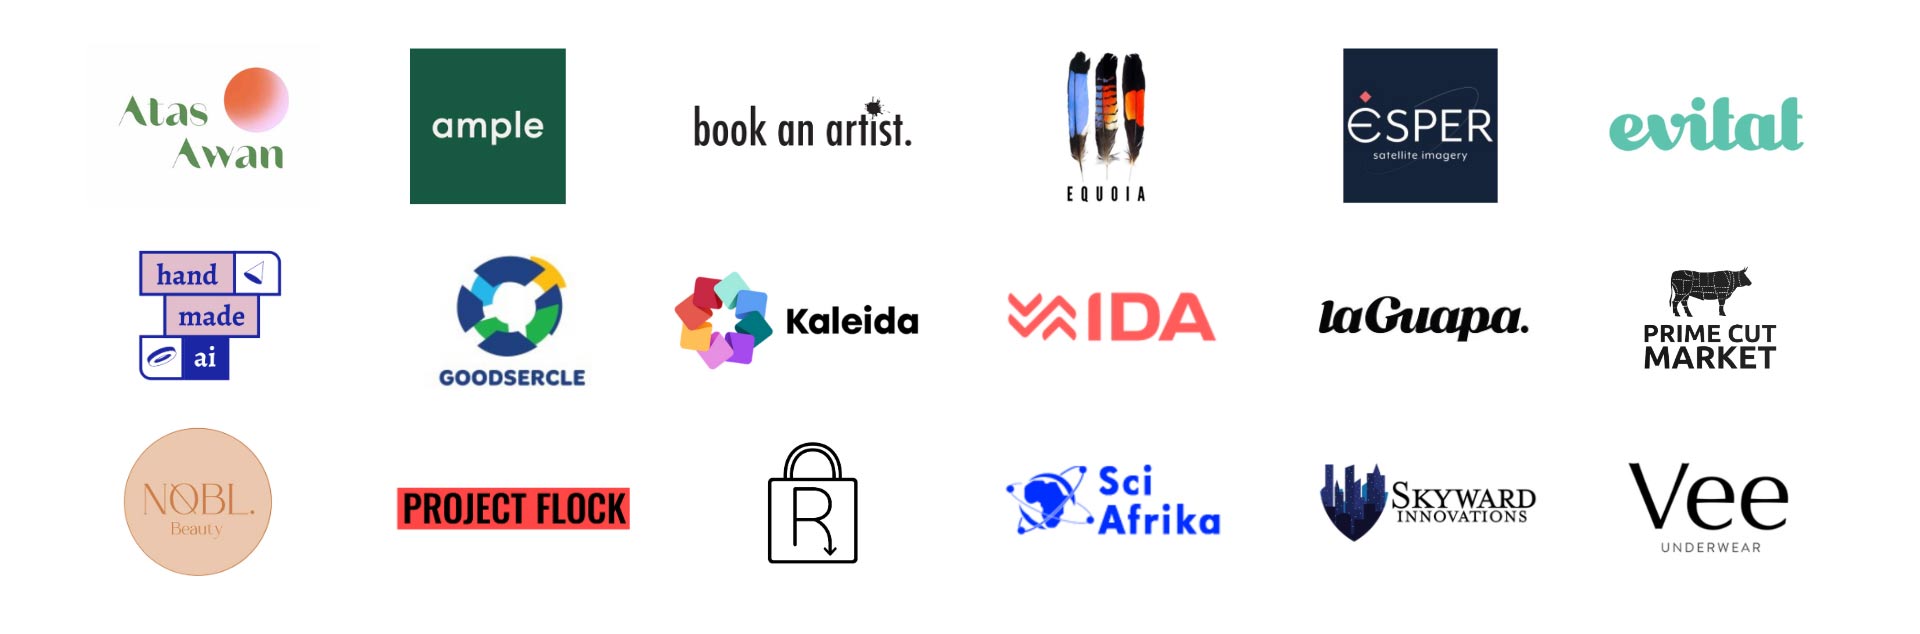 Showcase of various logos created by LaunchHUB's program alumni. There are 18 logos in total arranged in 3 rows of 6 logos each.